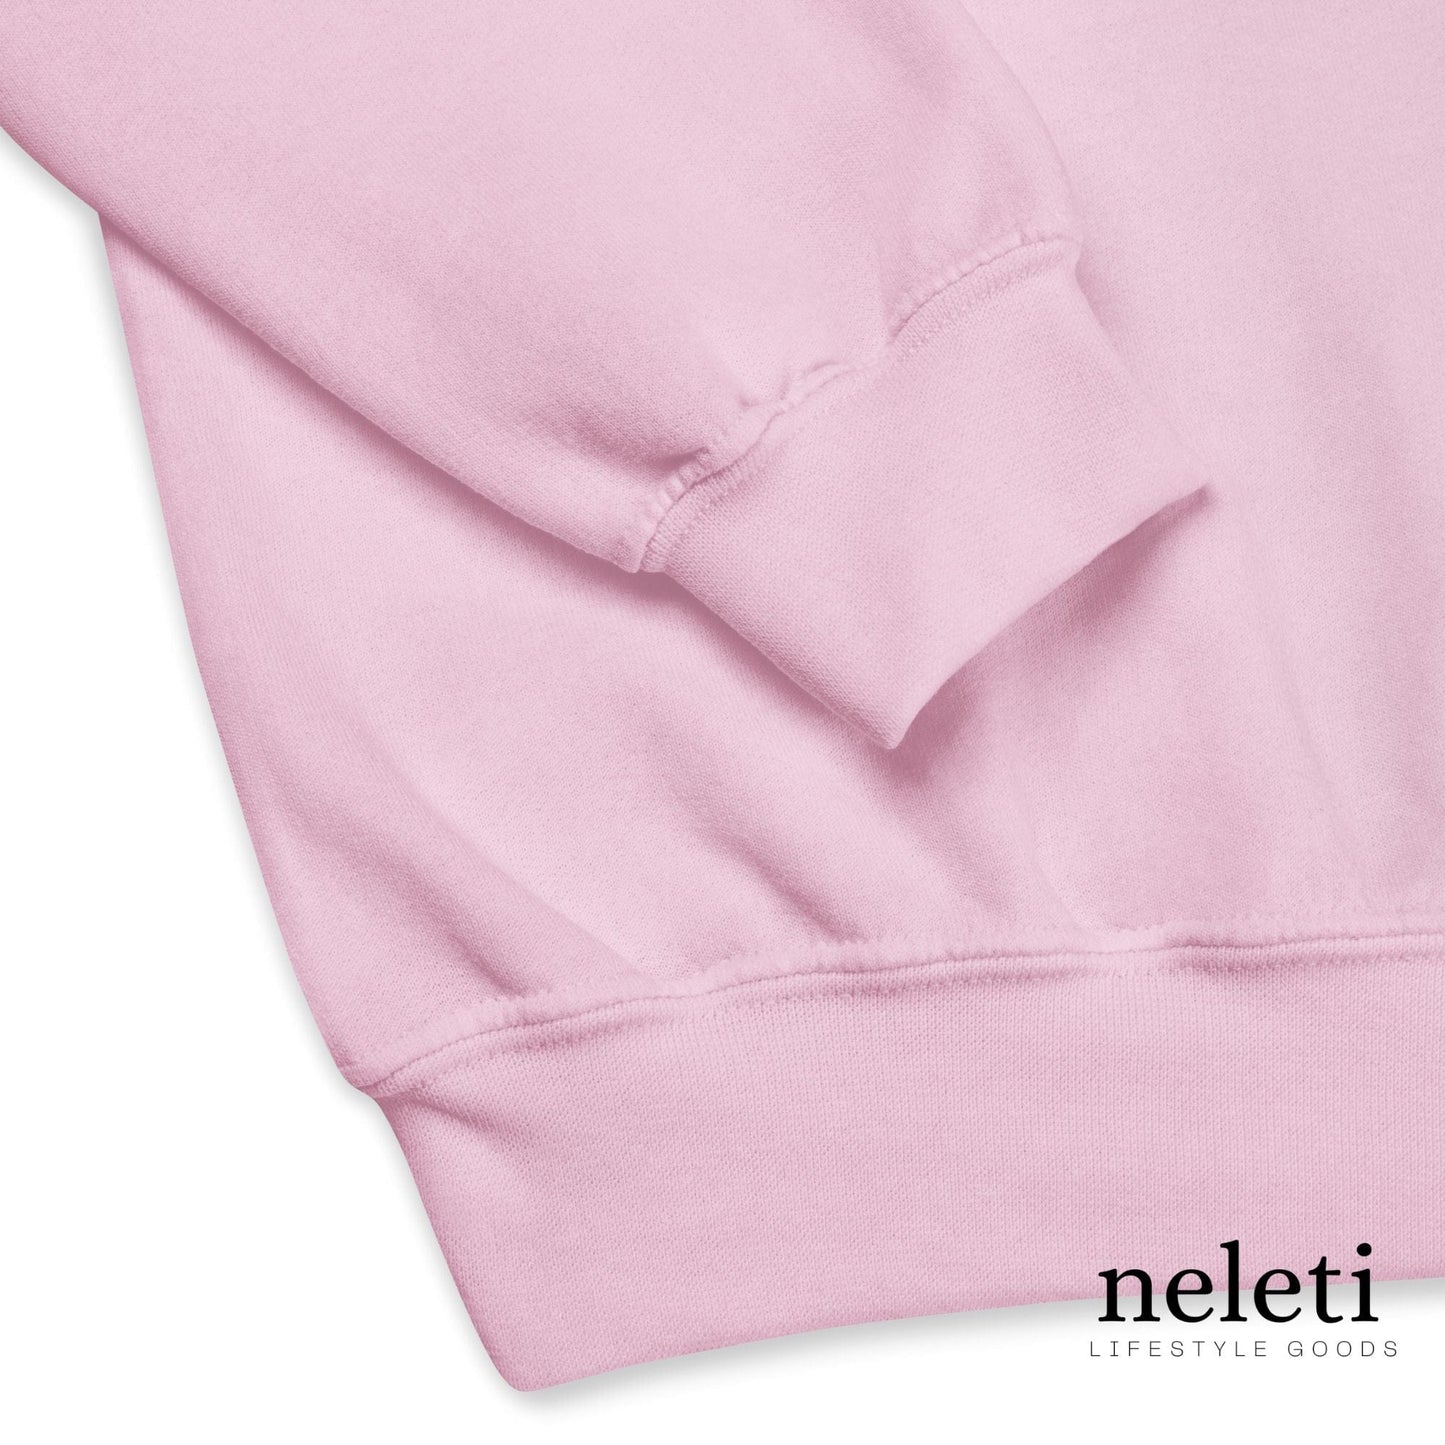 Custom Sweatshirts with Personalized Dog Ears and Slogan - Exclusive at Neleti.com